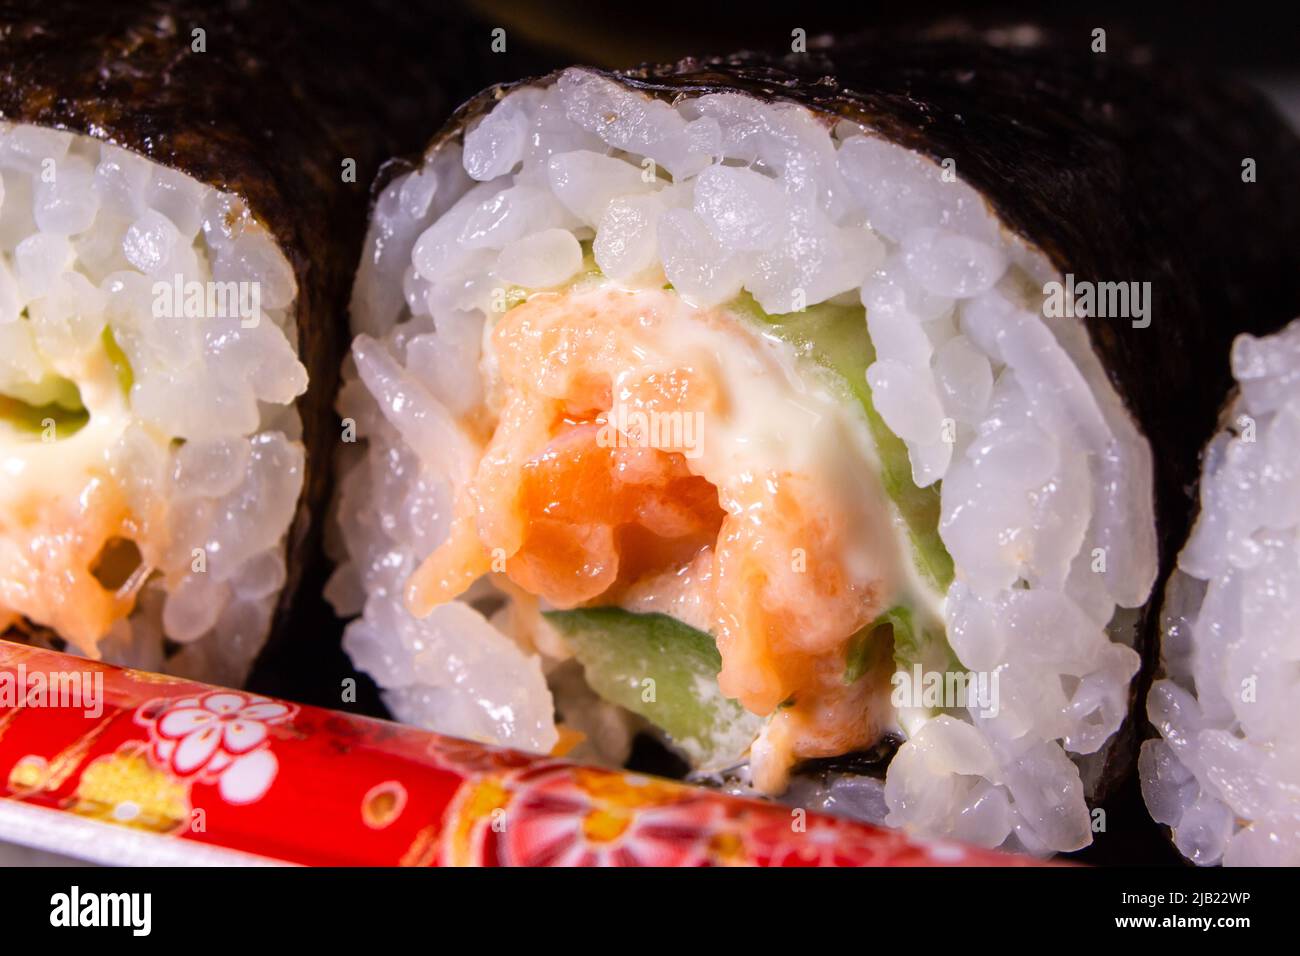 The closeup of the takeout salmon maki zushi (salmon sushi rolls) packed in the plastic food container. Stock Photo